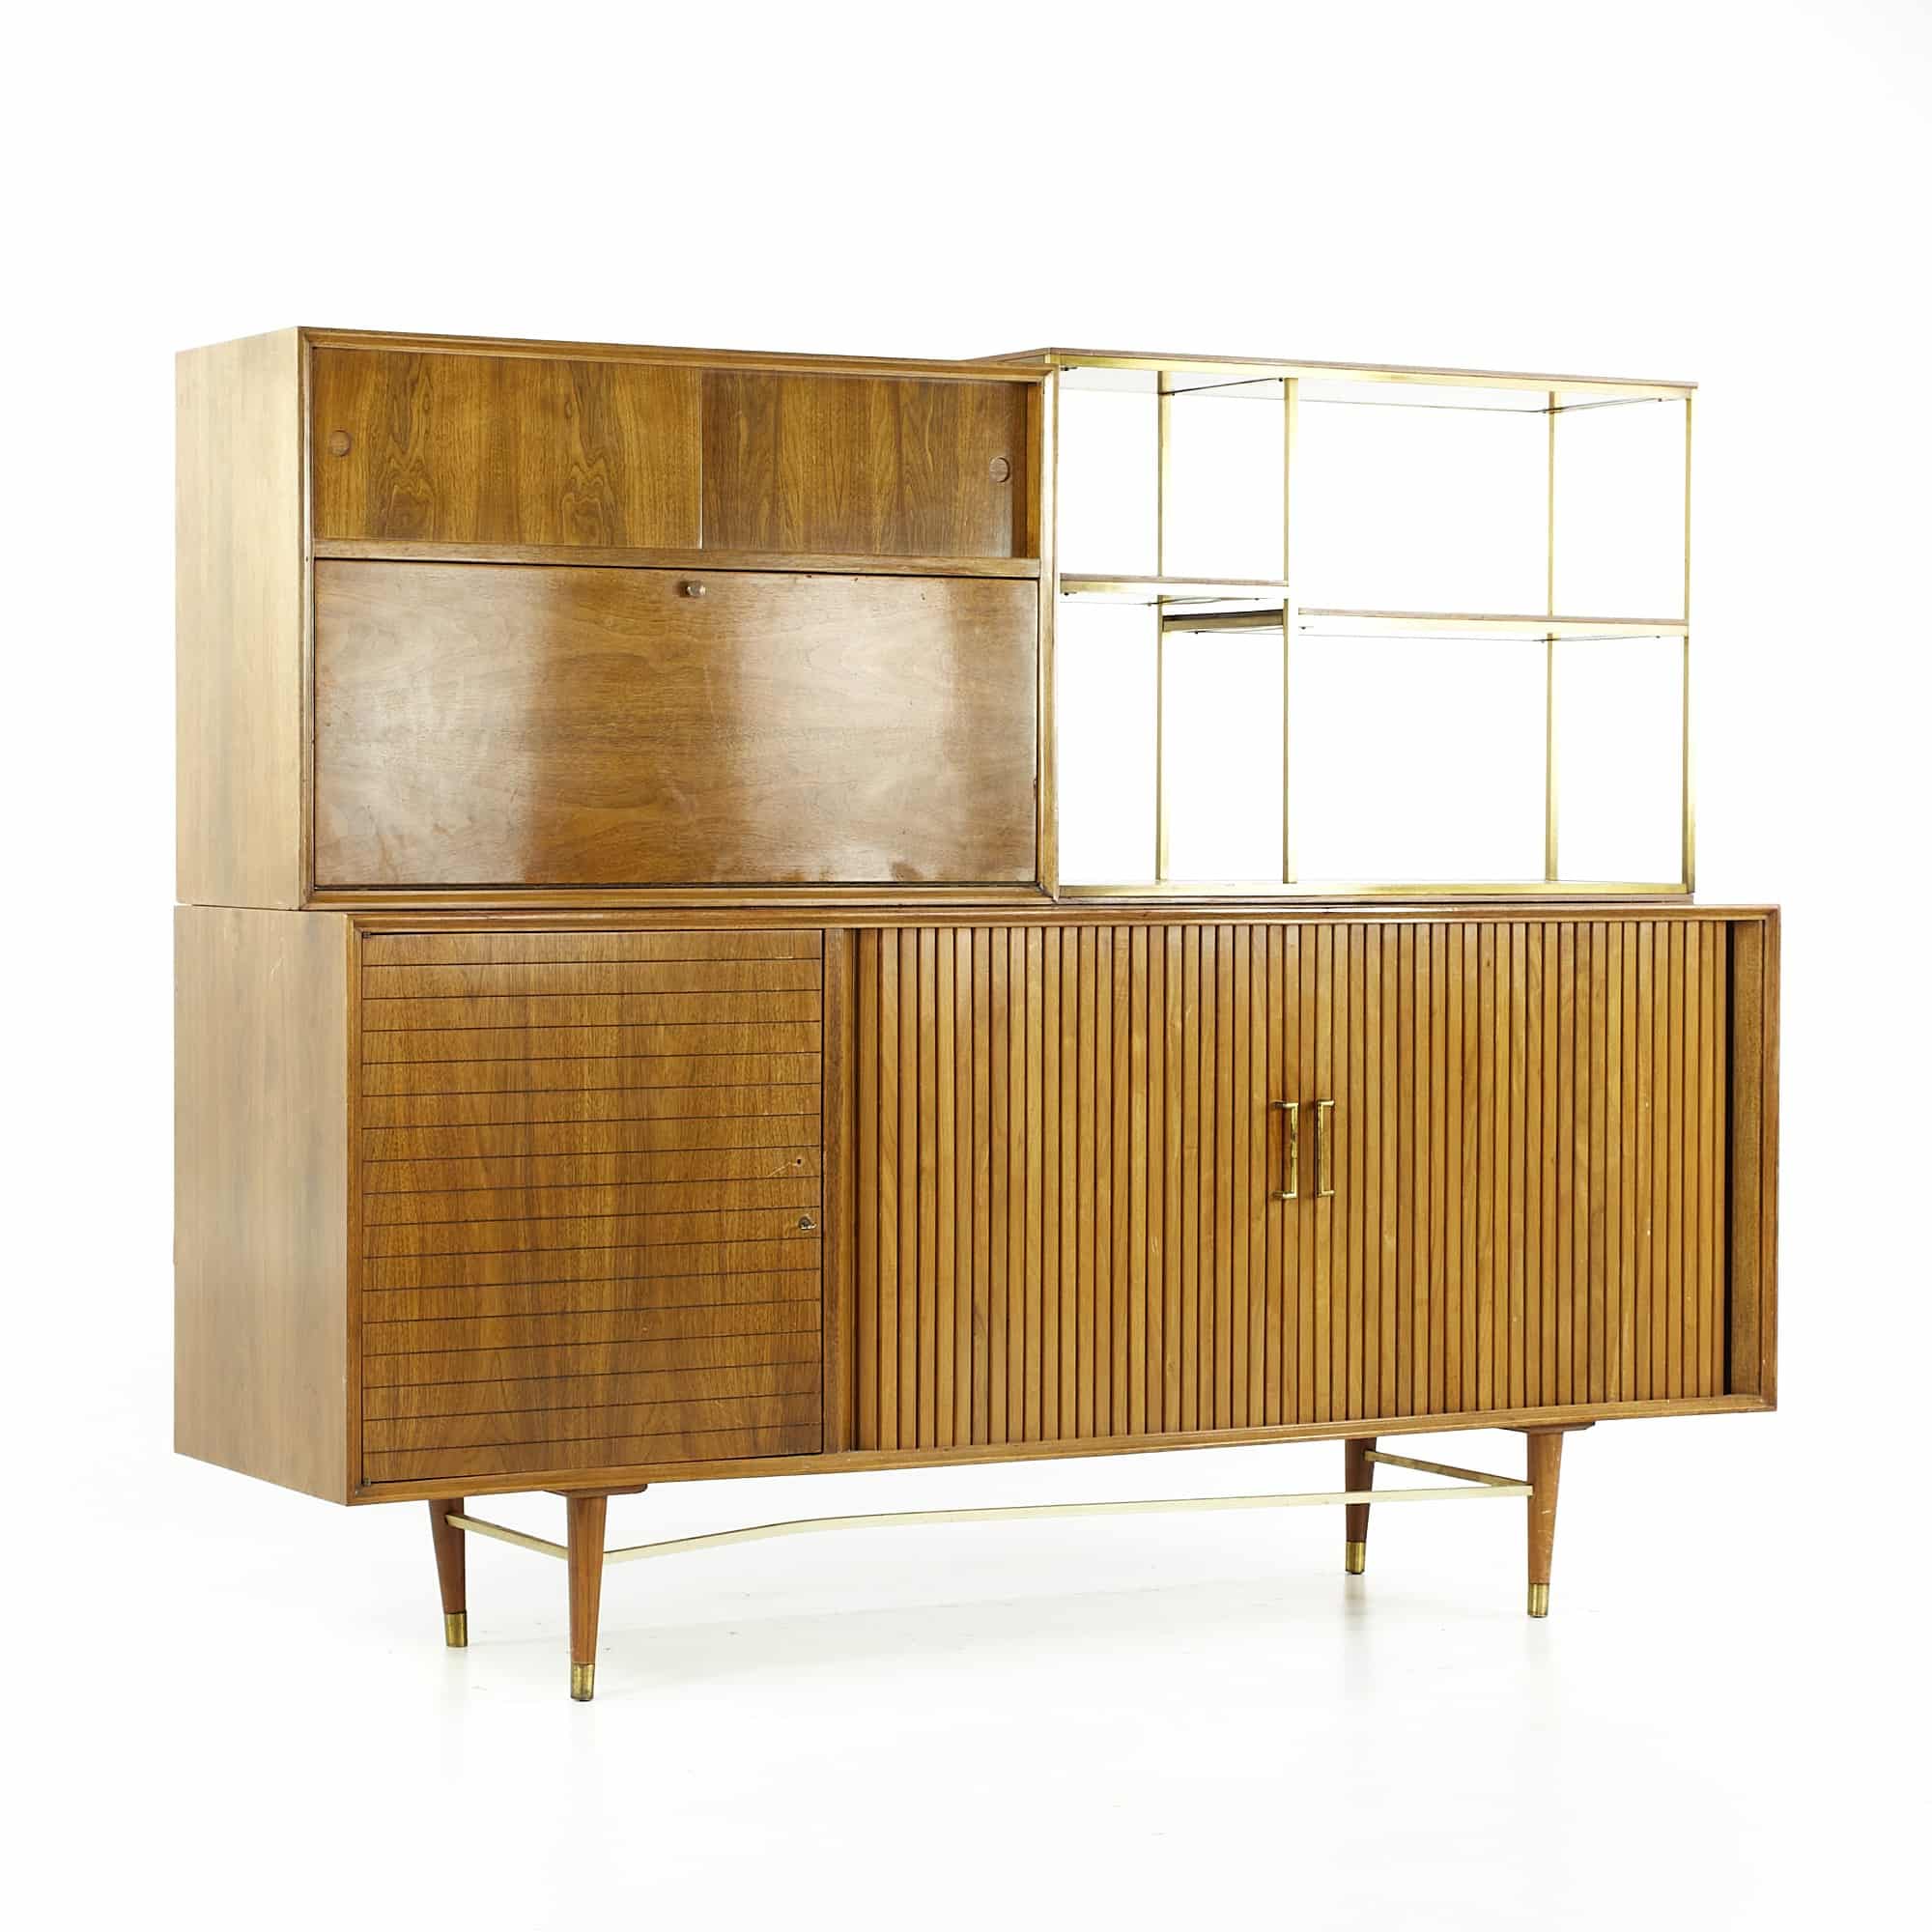 Paul Mccobb Furnette Mid Century Brass and Walnut Credenza with Cabinet and Shelving Unit